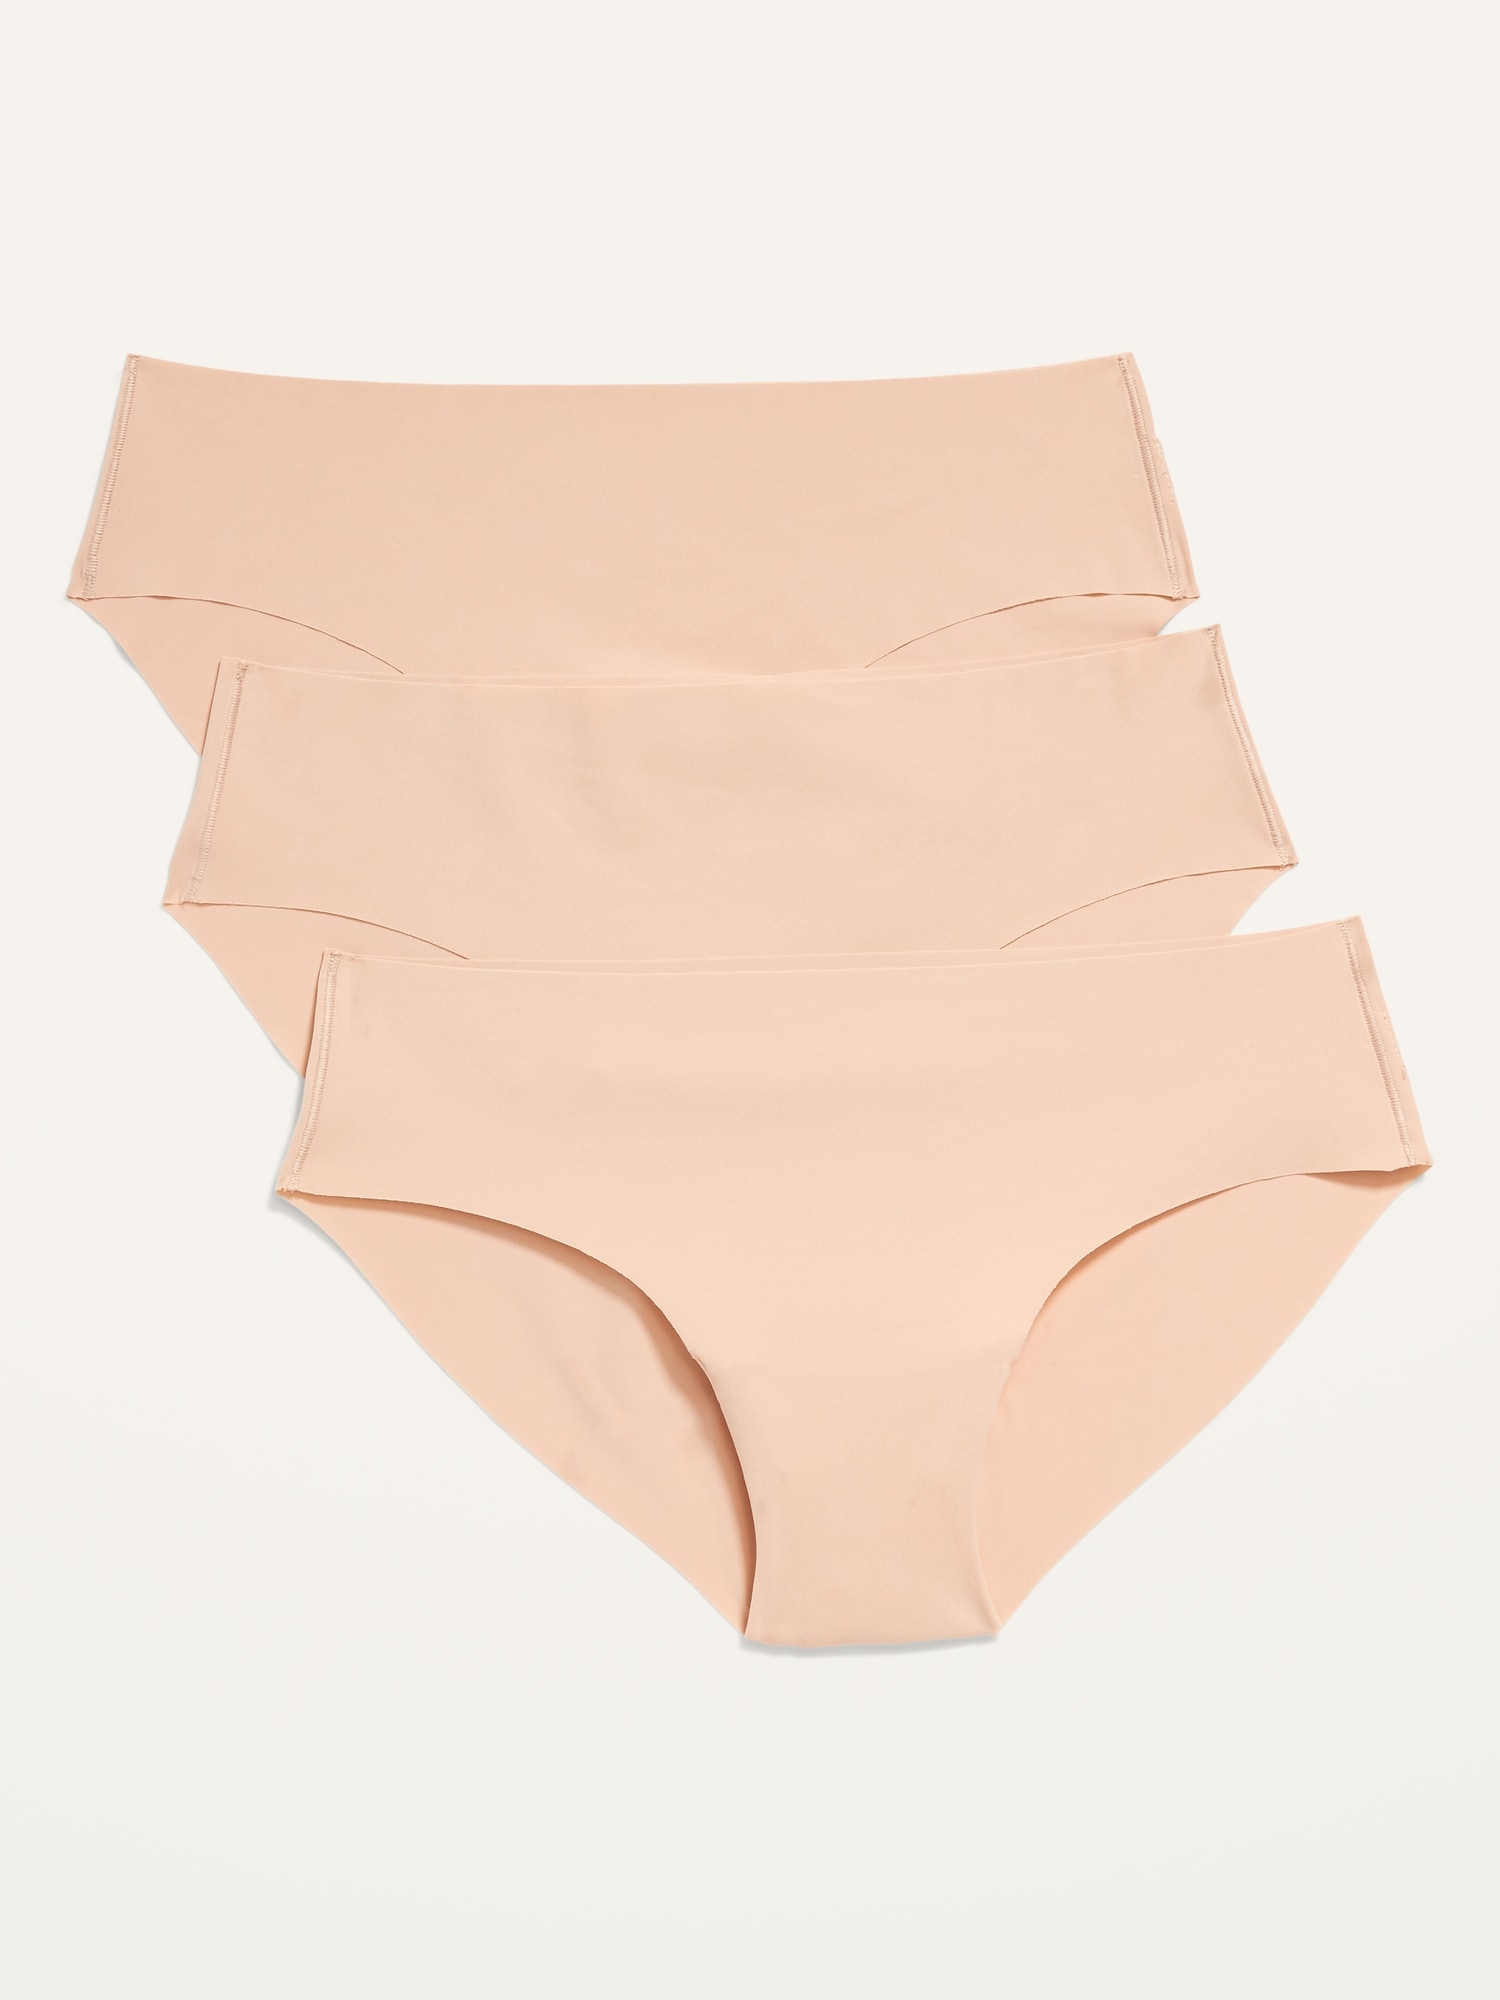 Barely Hipster Briefs - Women's